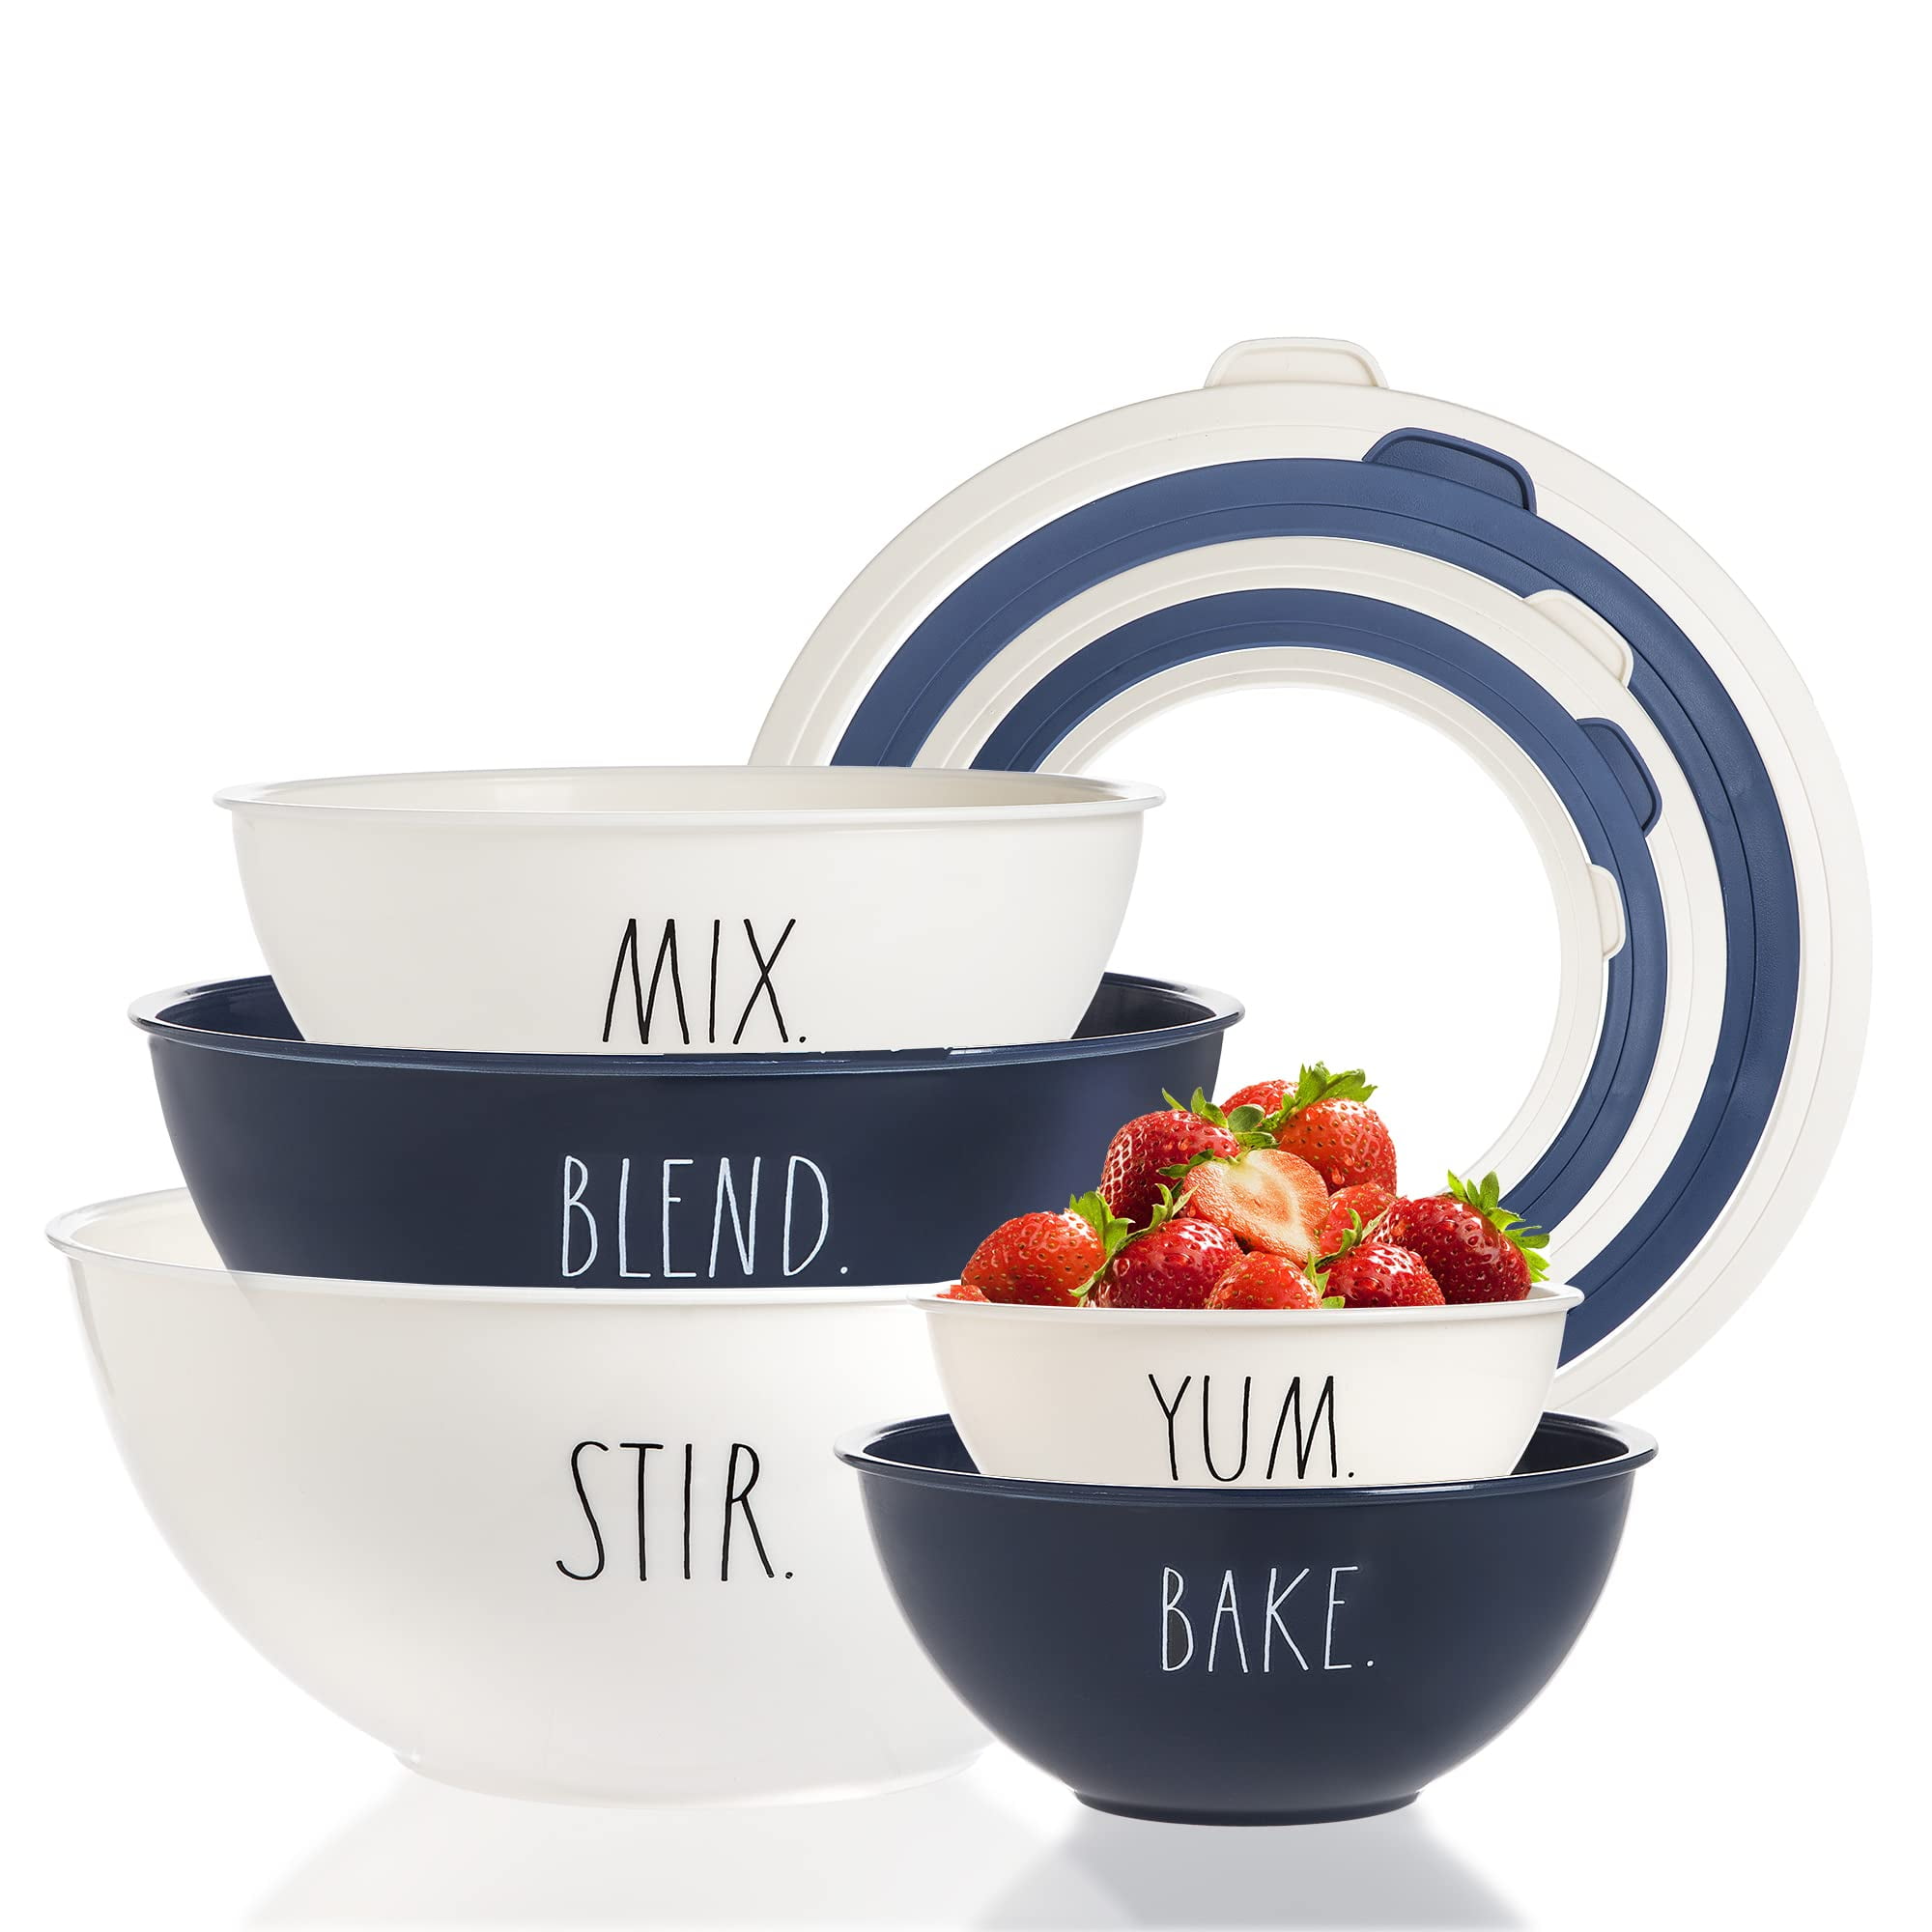 shopwithgreen Plastic Storage Bowls with Lids, Rapid-Access Design Kitchen  Bowls Food Storage, Mixing Bowls Airtight Nest Stackable, Dishwasher 